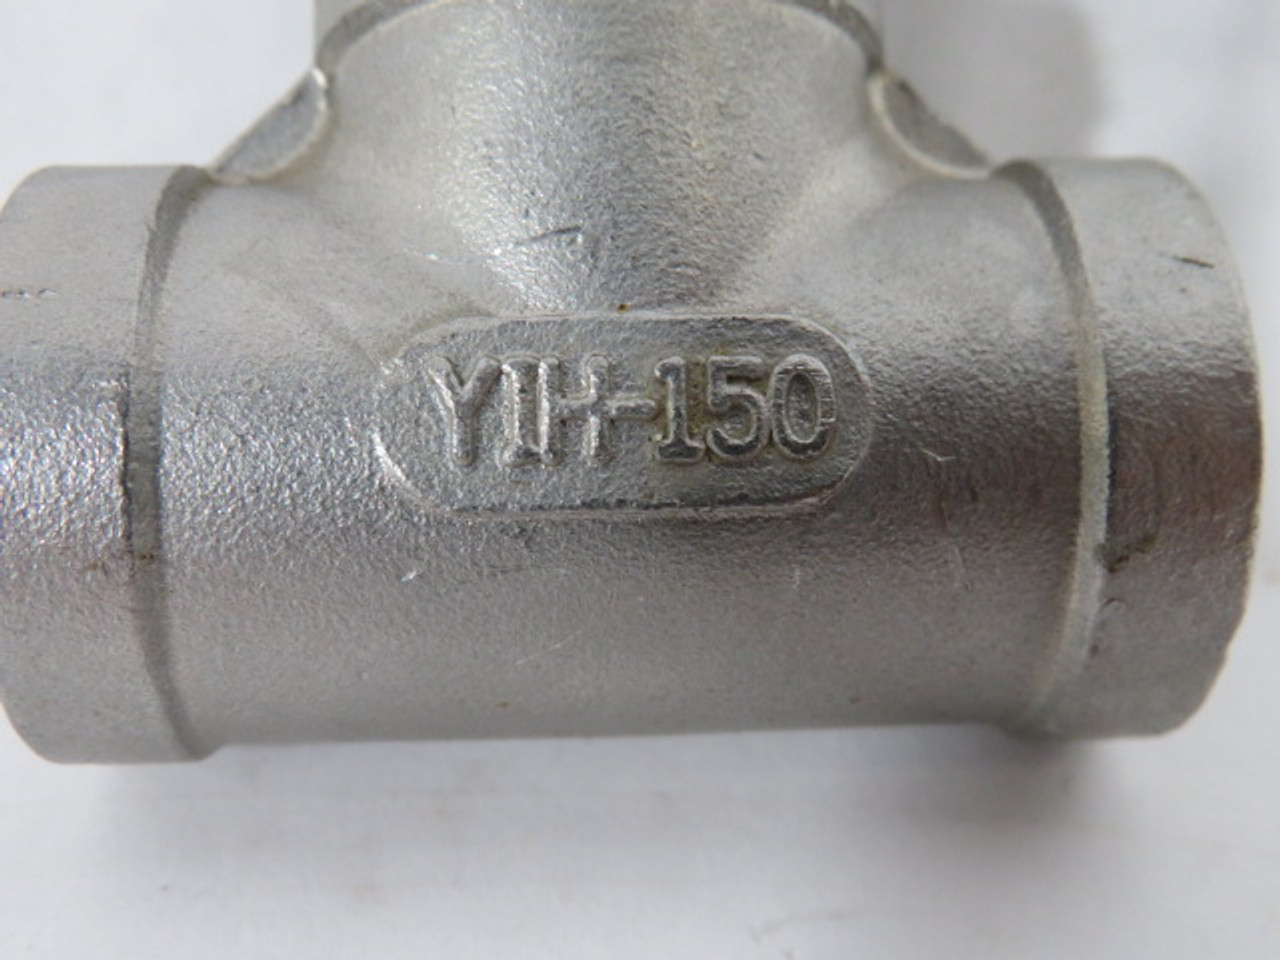 Generic YIH-150 Stainless Steel Tee Fitting .070" Port USED